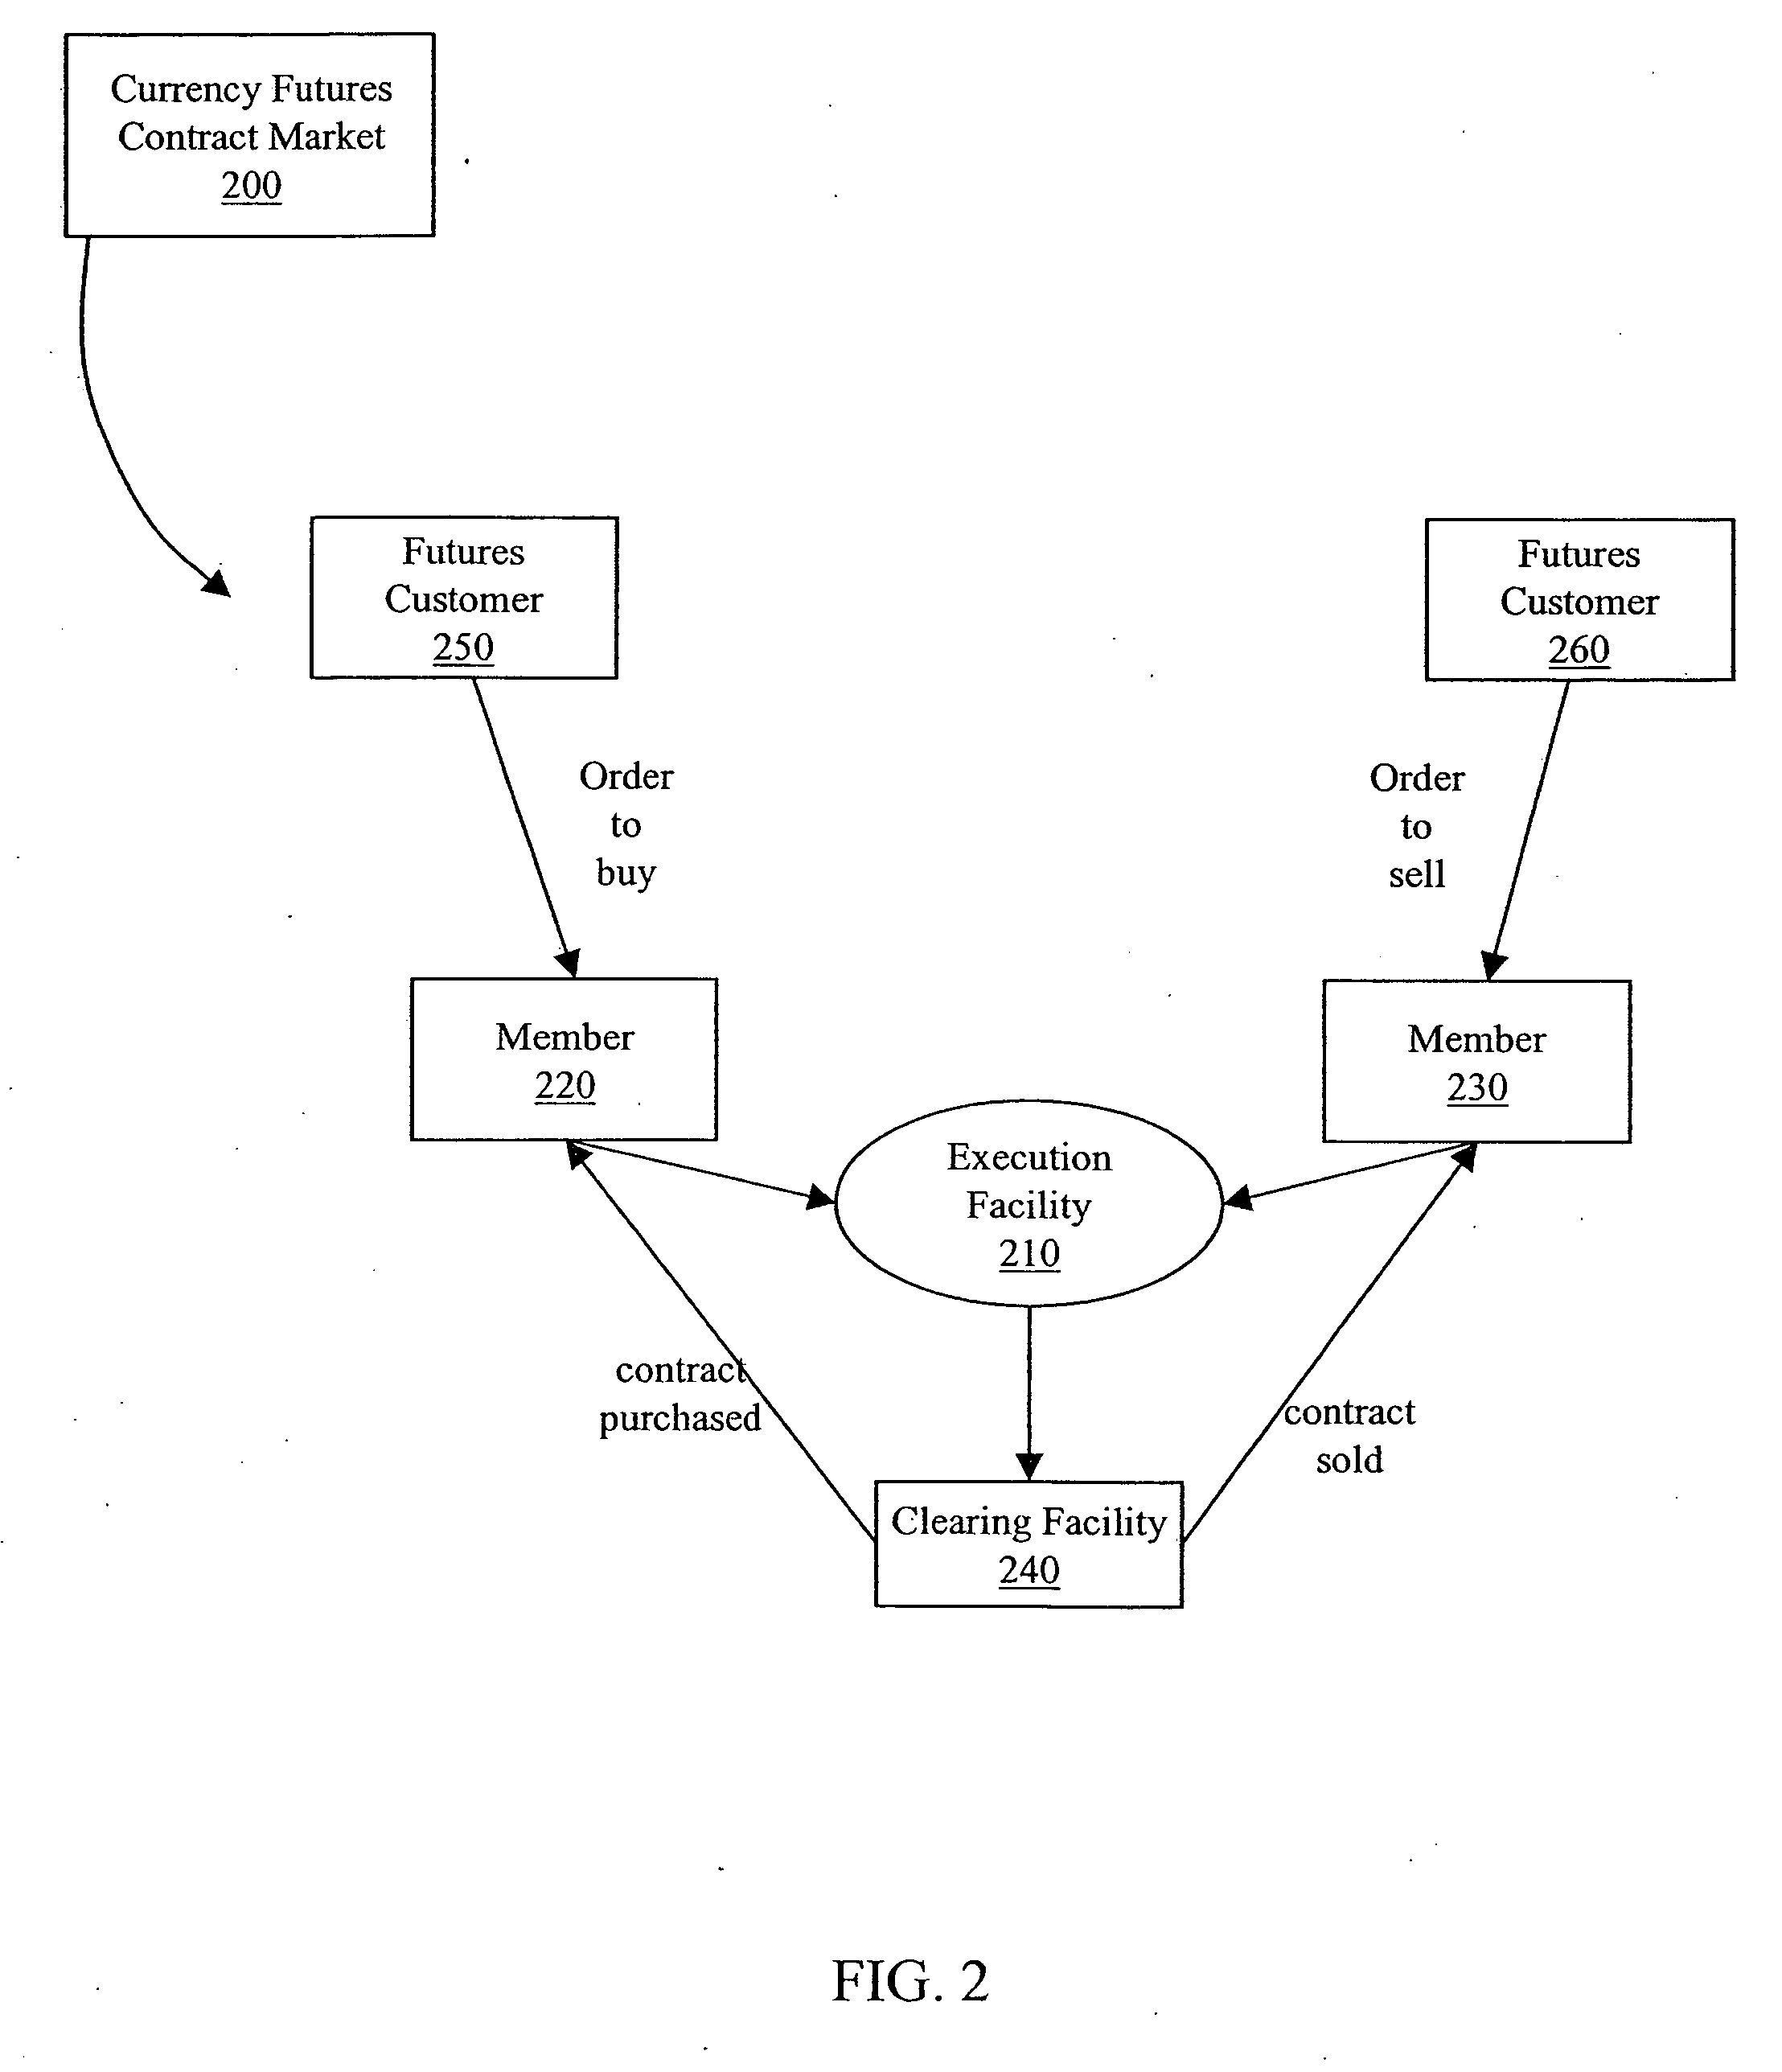 System and methods for creating, trading, and settling currency futures contracts